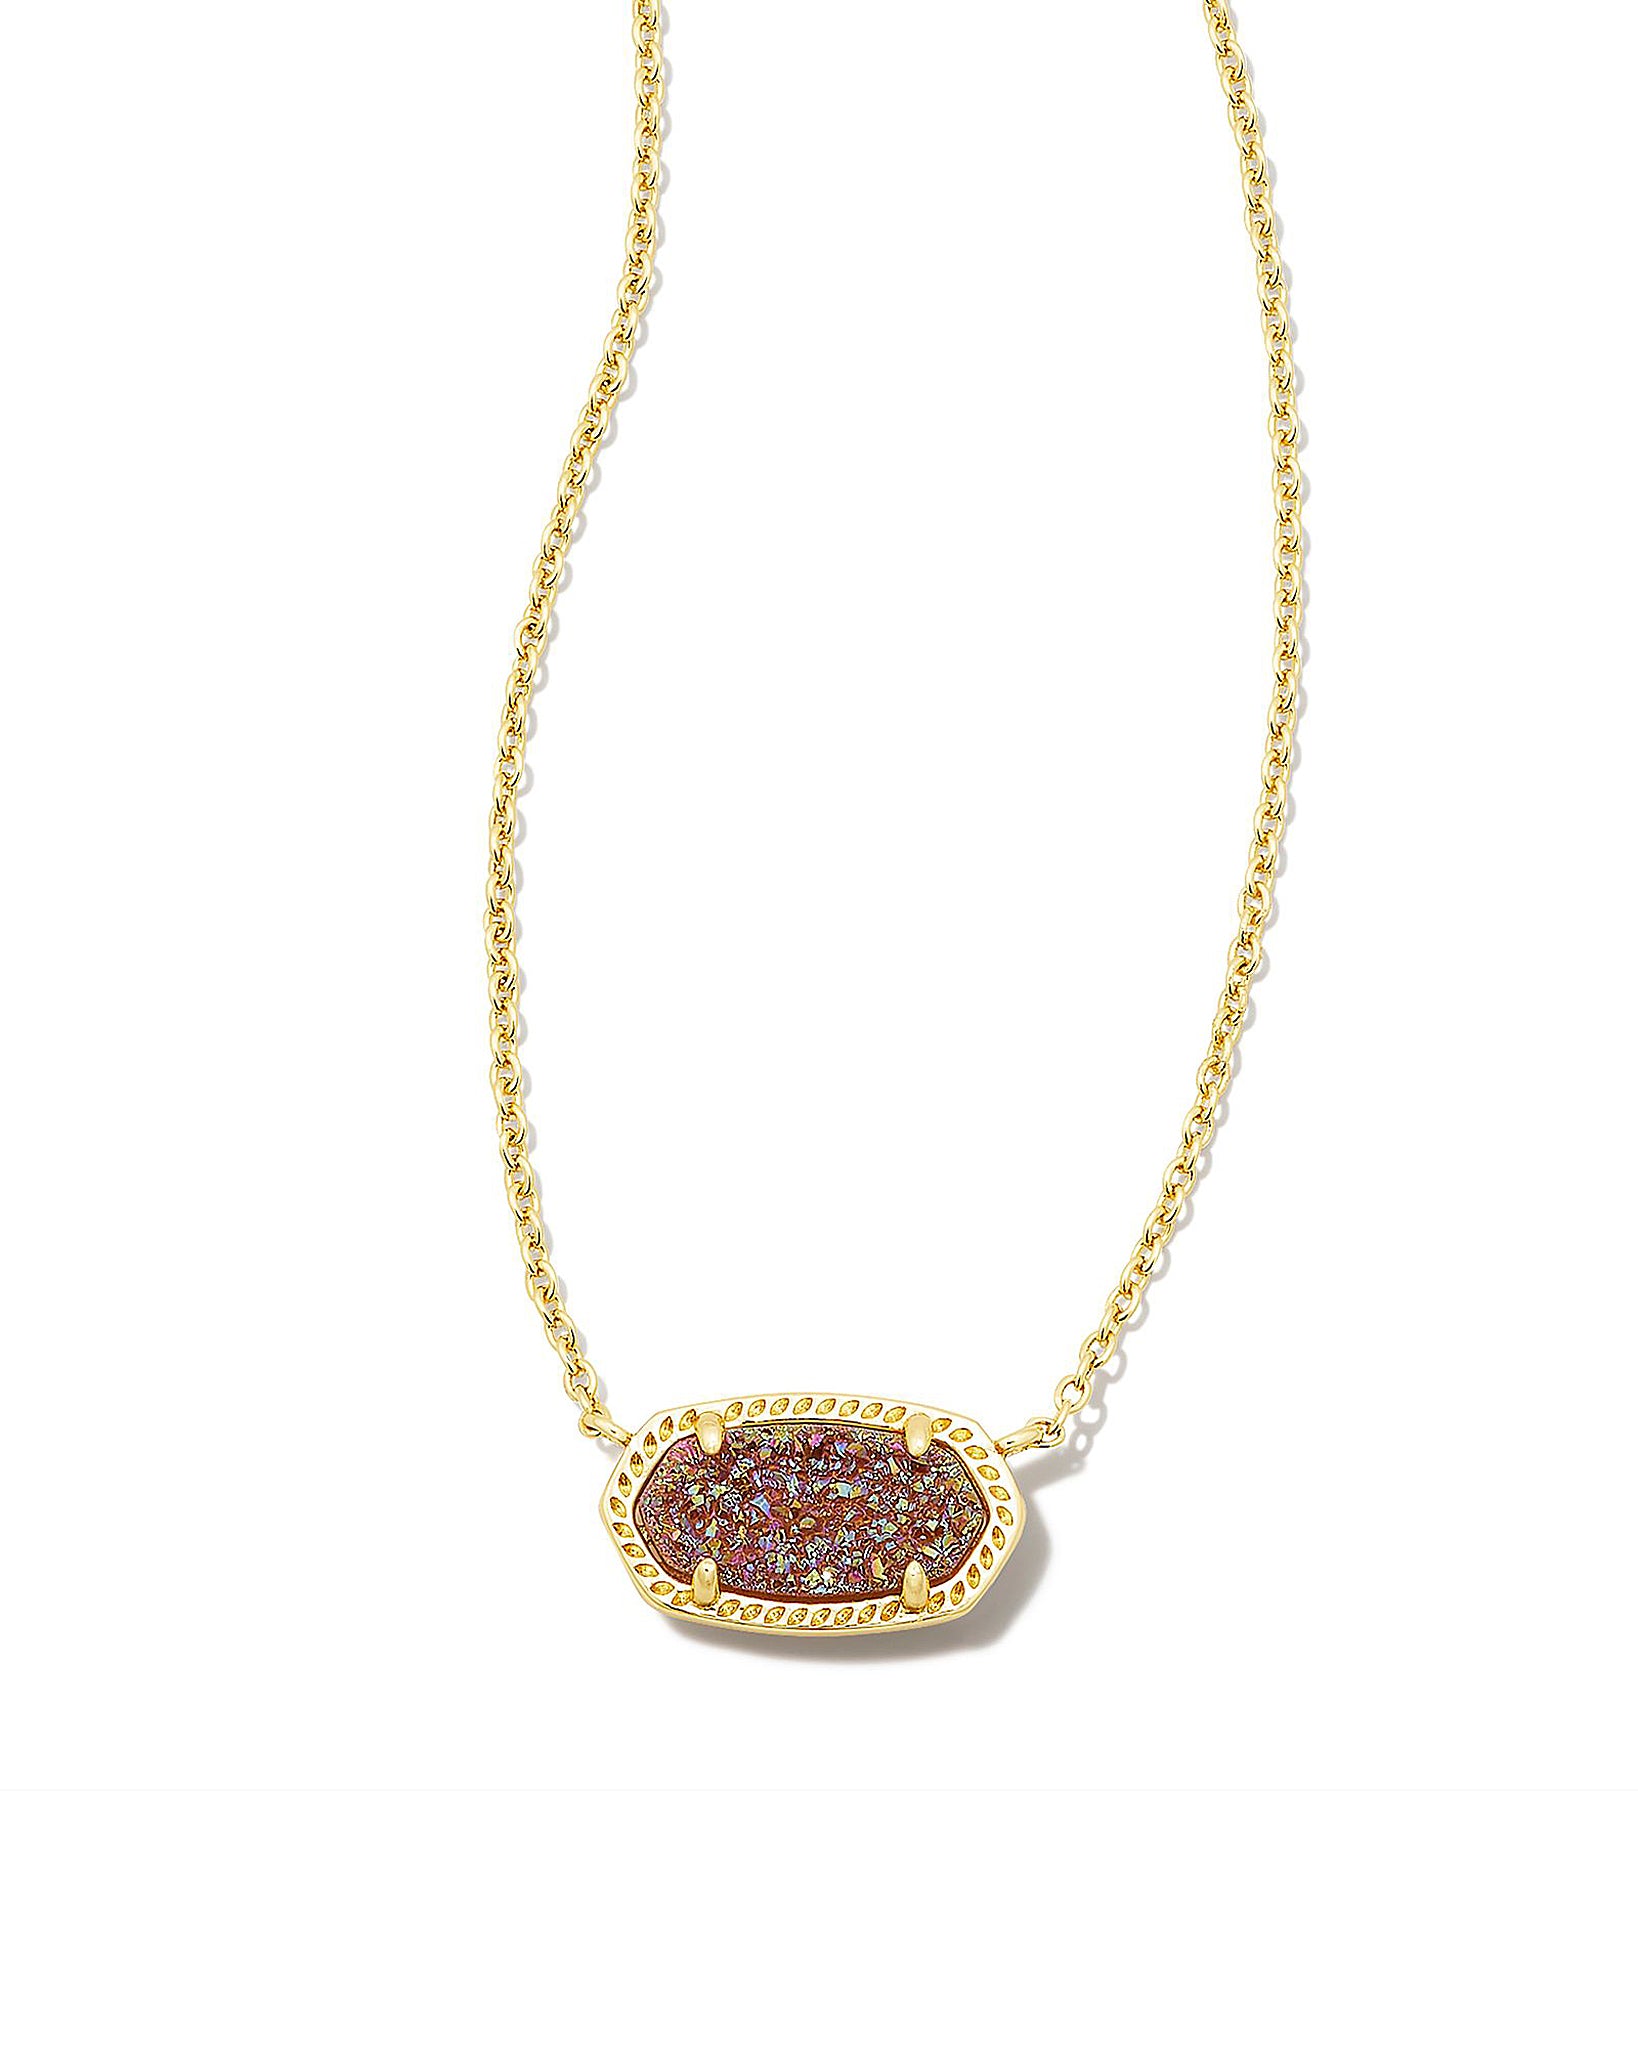 Kendra Scott Elisa Oval Pendant Necklace in Spice Drusy and Gold Plated